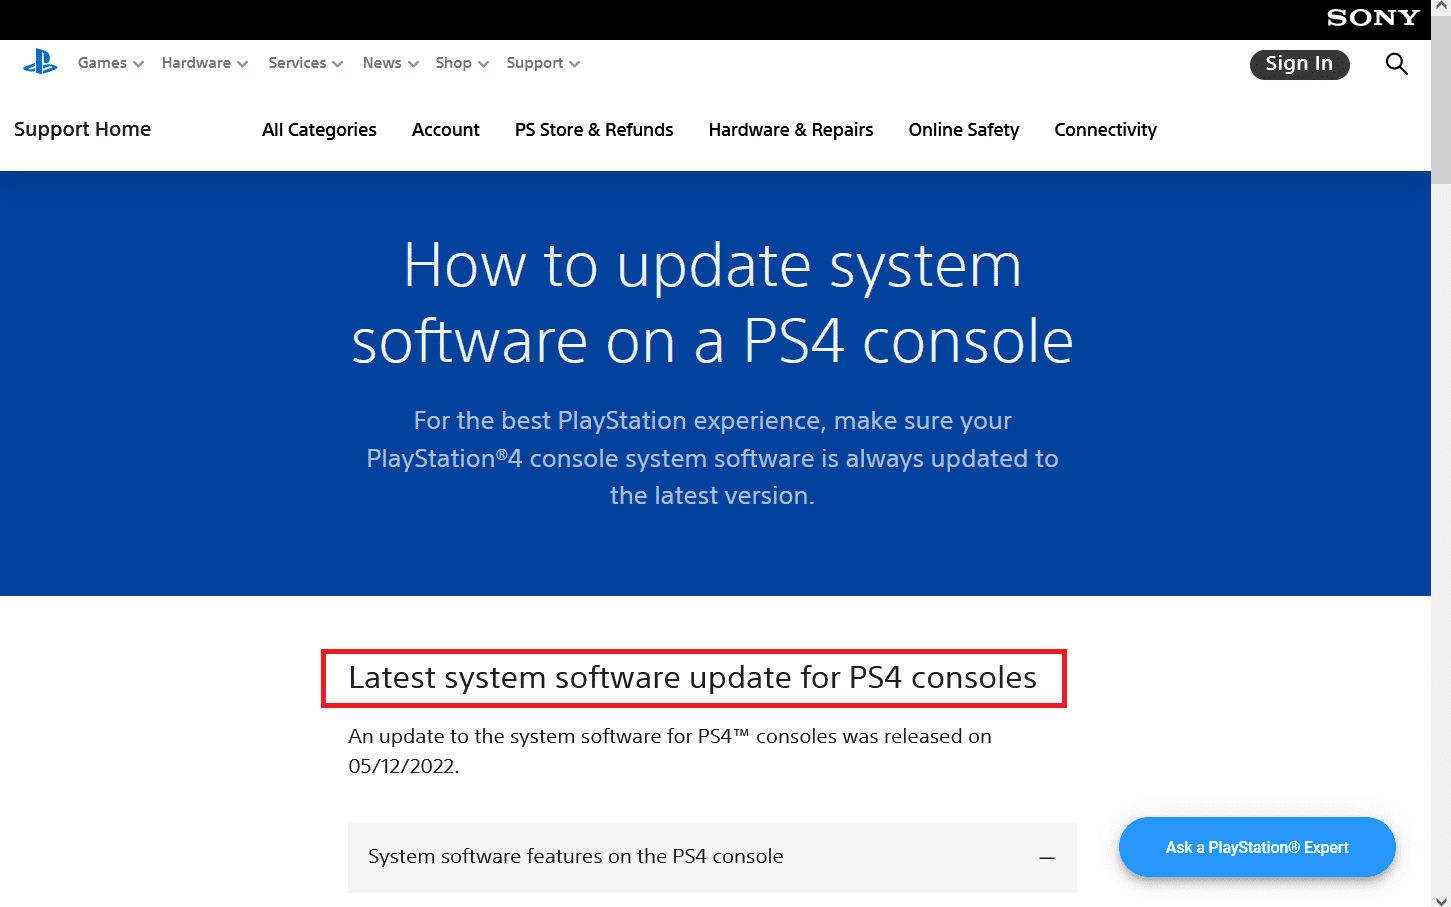 Download the latest PS4 update